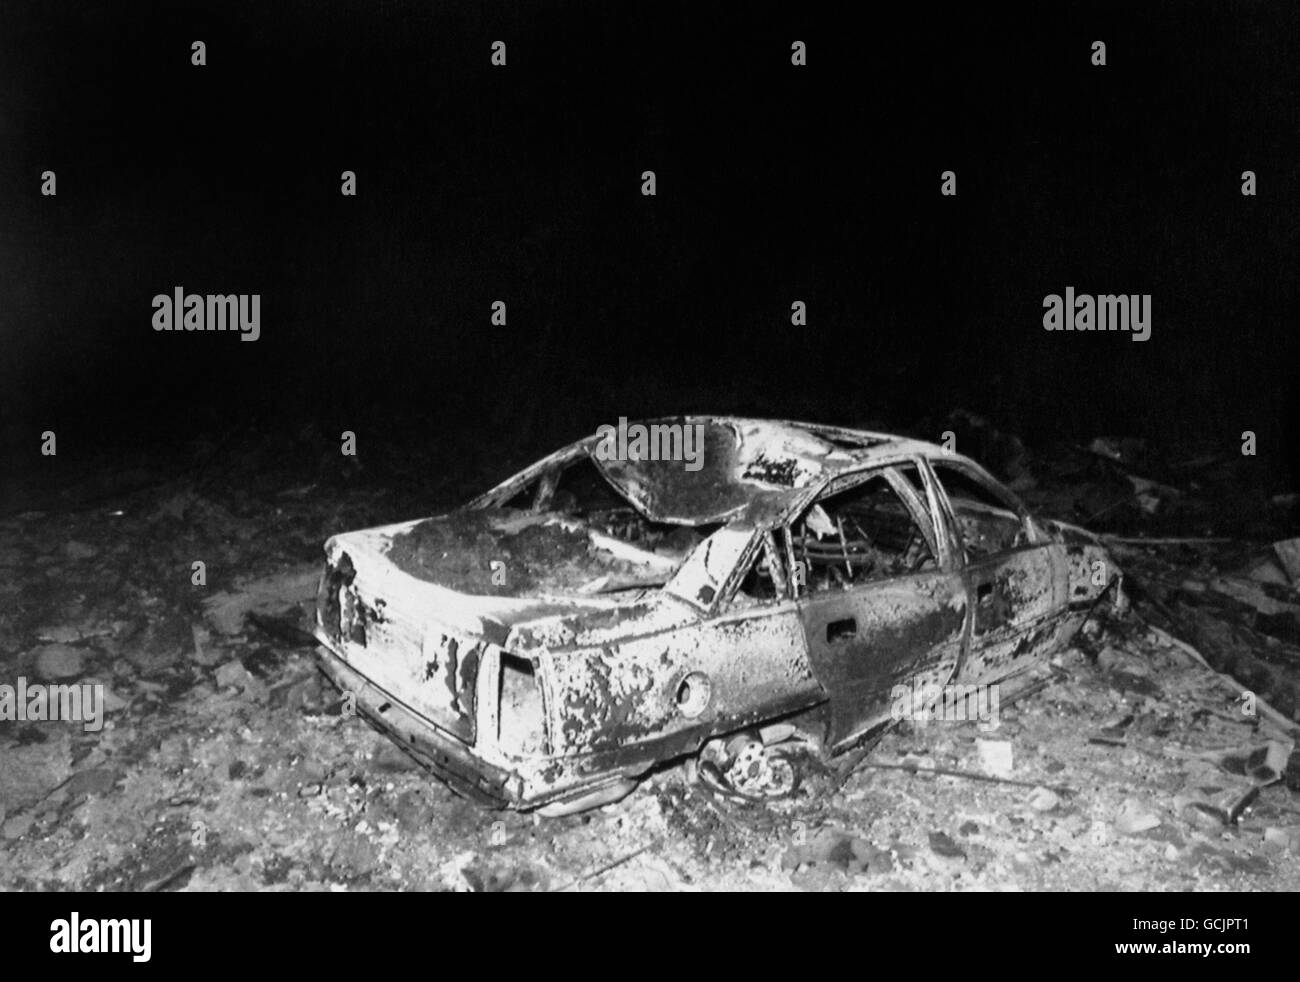 A burnt out car at the garage hit by wreckage from the Pan Am Boeing flight PA 103 which crashed at Lockerbie. The crash killed all 258 on board and 17 people on the ground. Stock Photo